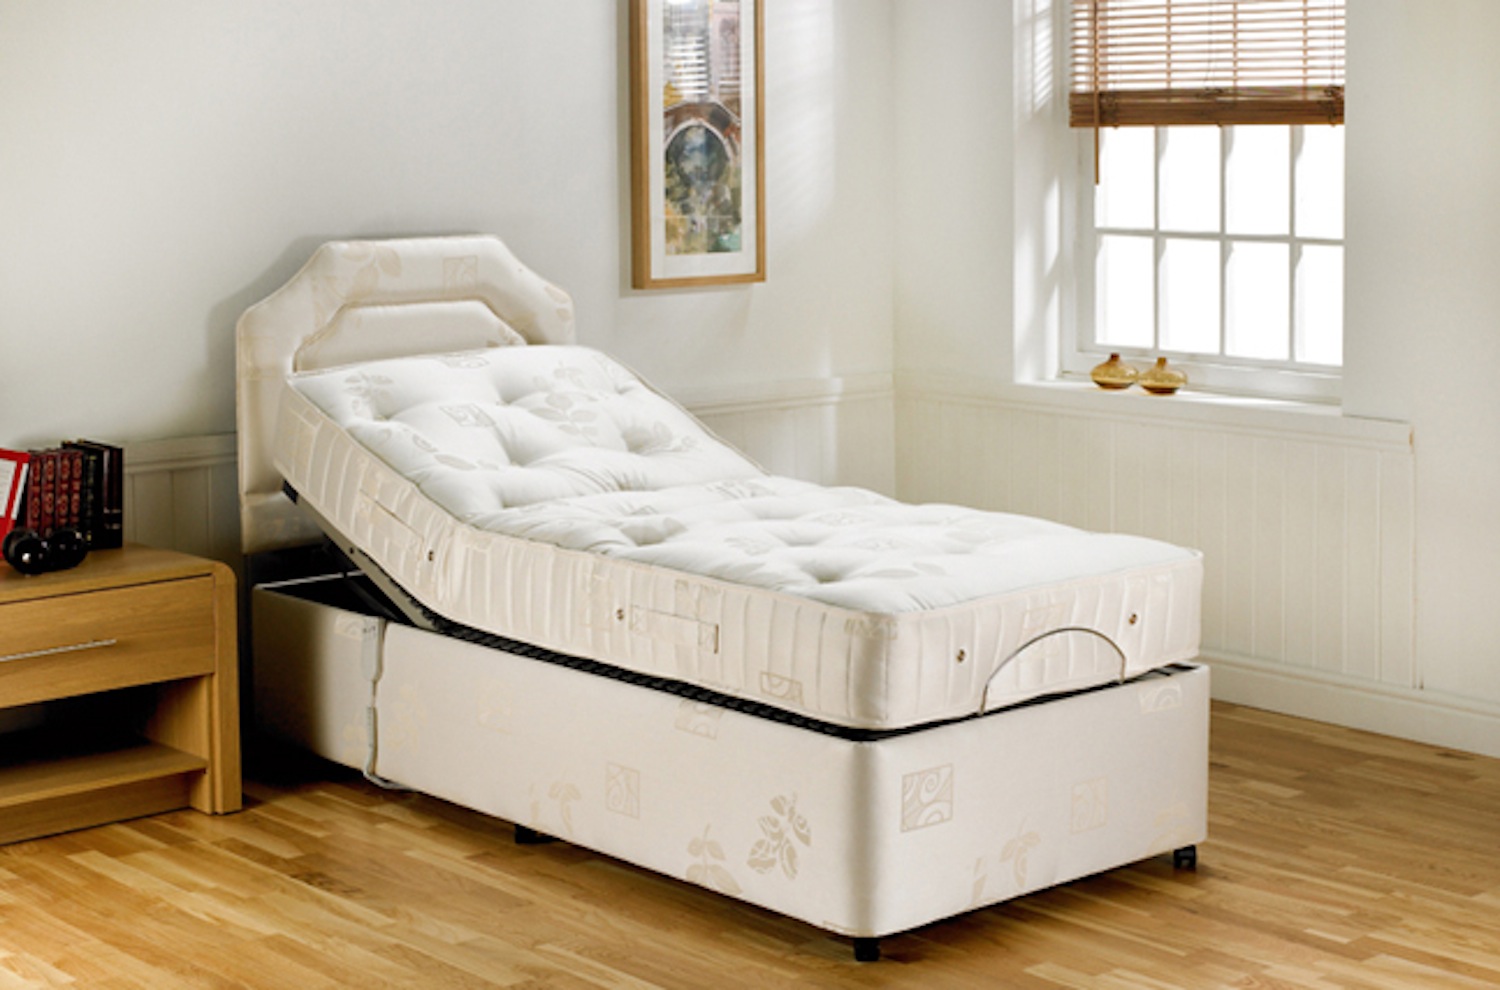 orthopaedic bed and mattress